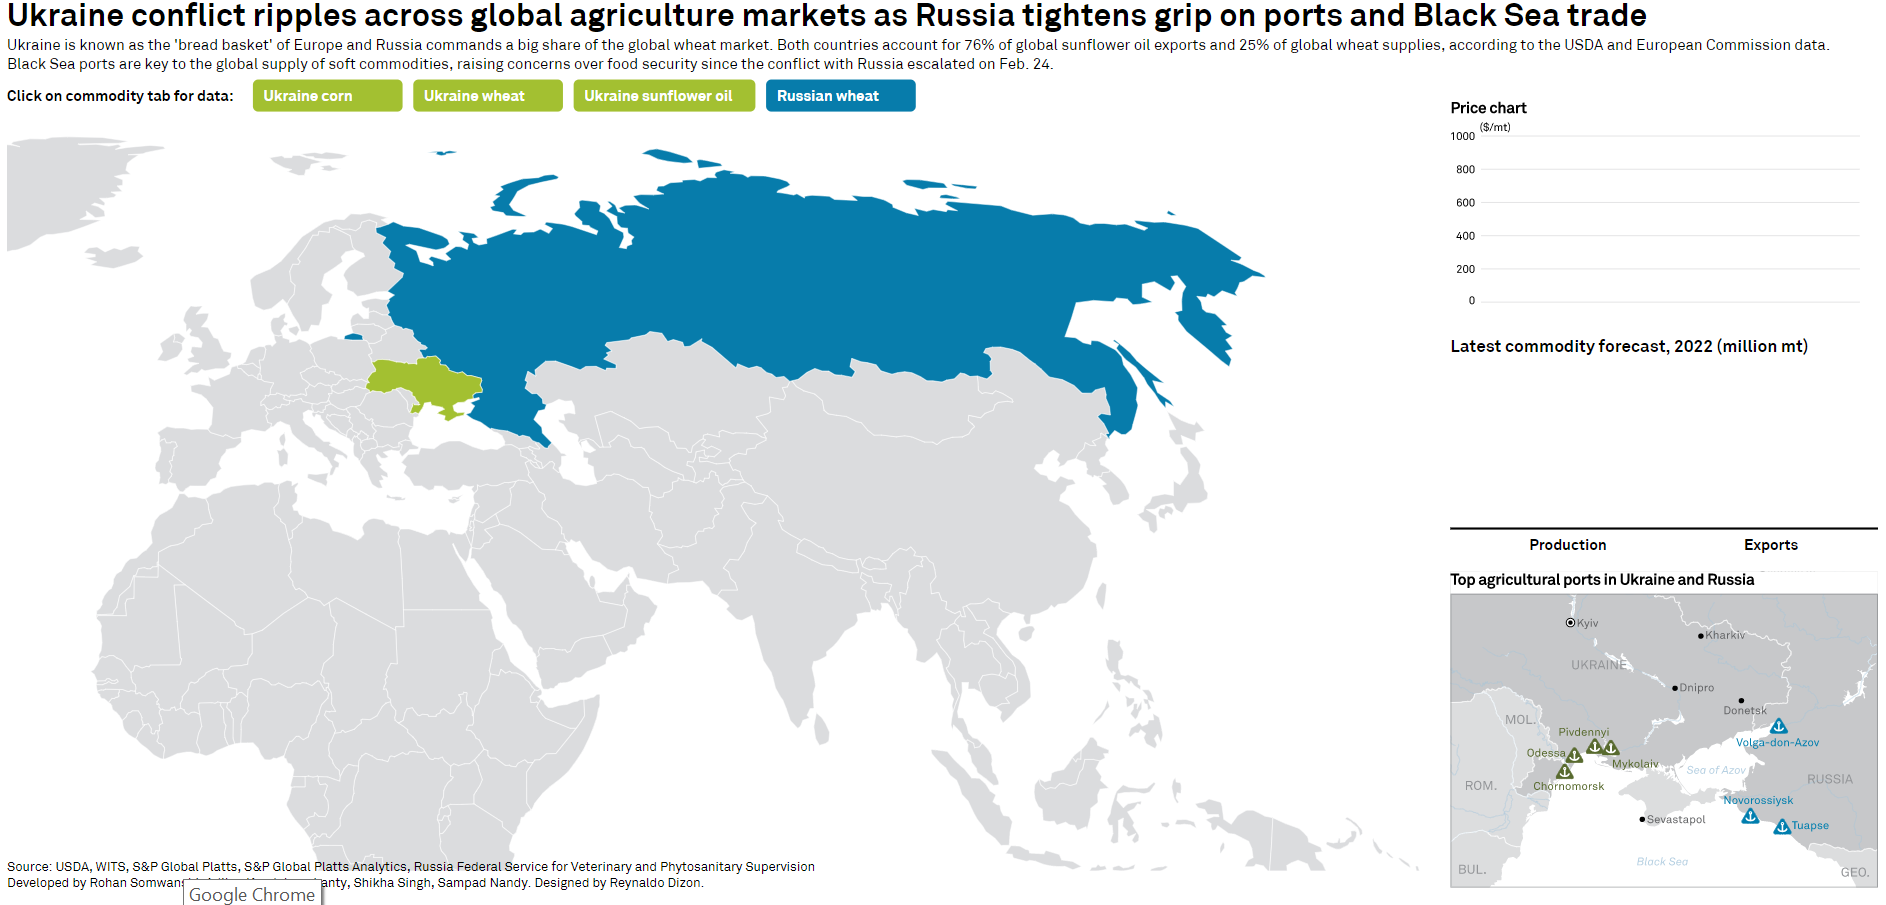 Ukraine-Russia conflict shakes agriculture supply chains, raises food security concerns